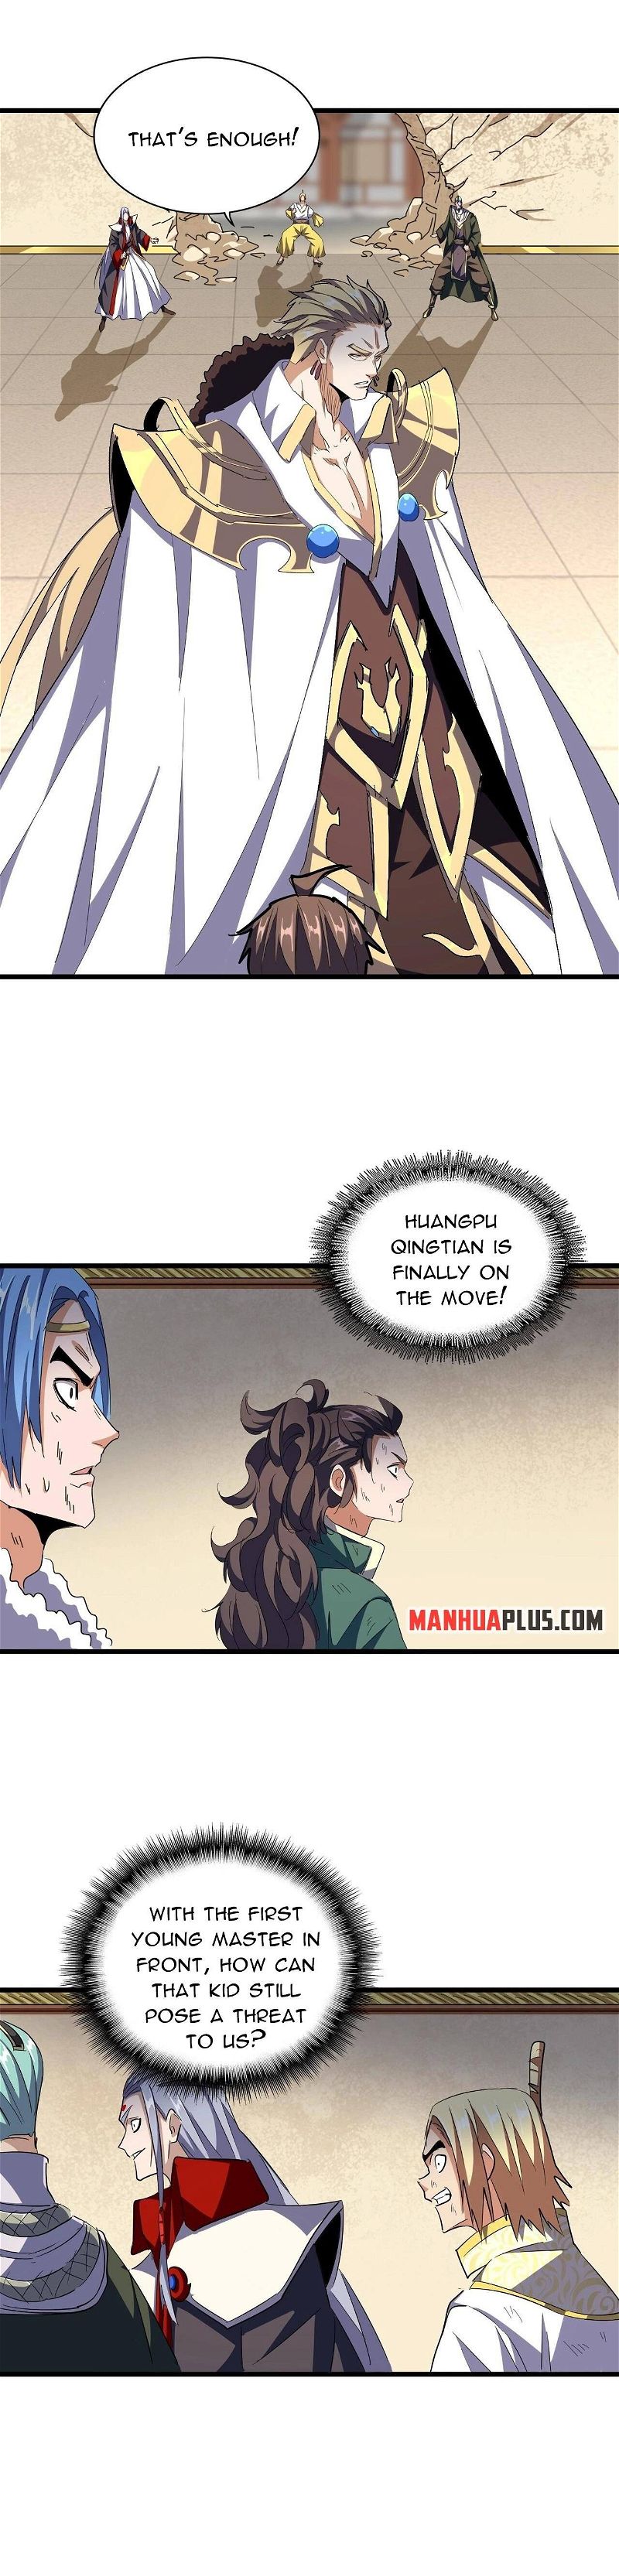 Demon Magic Emperor Chapter 297 page 19 - MangaWeebs.in